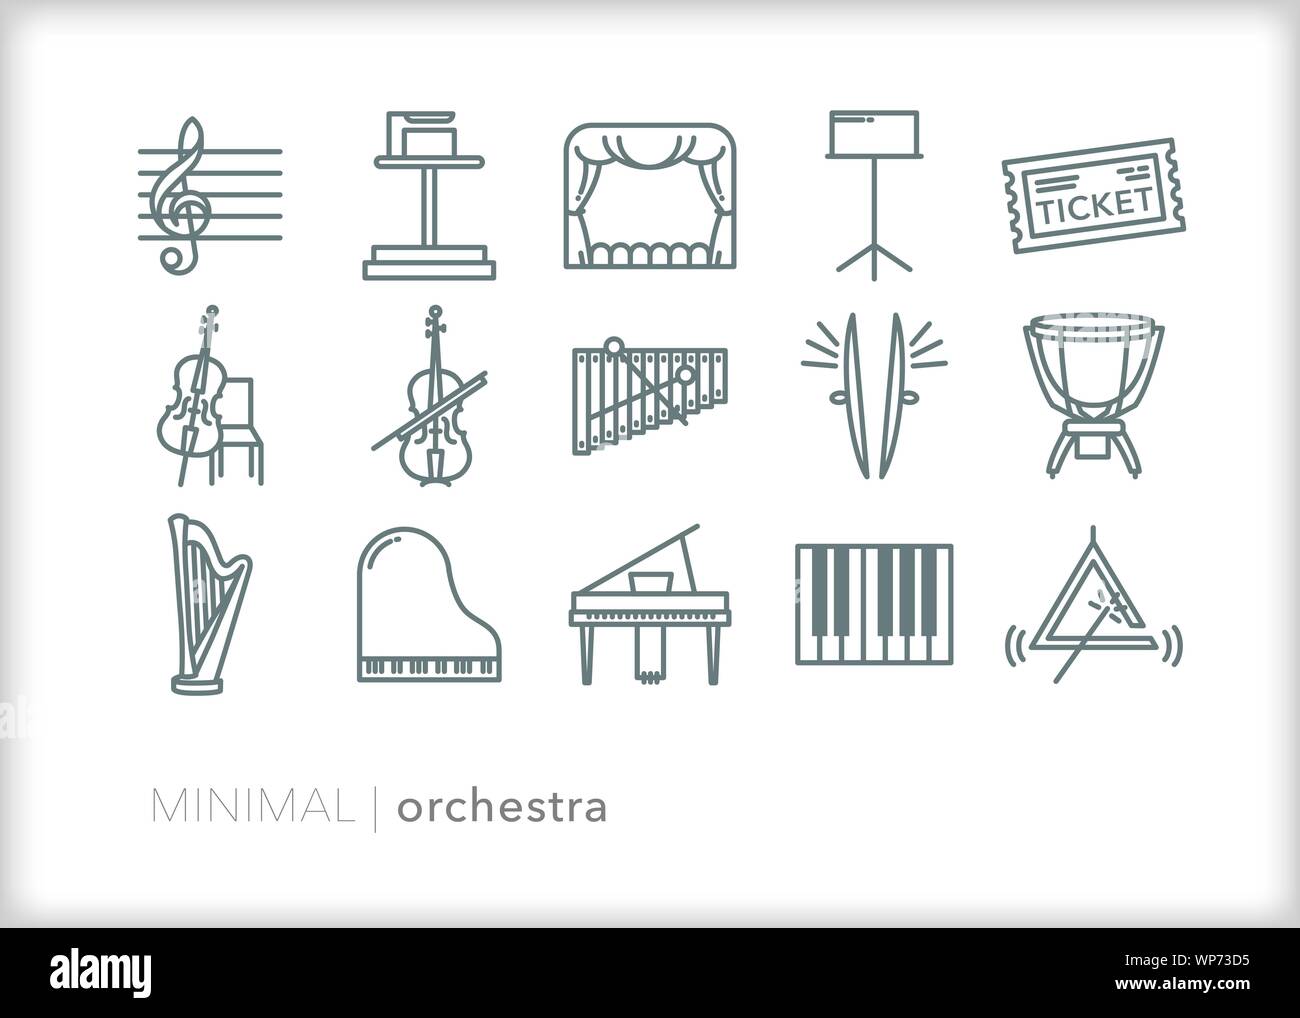 Set of 15 orchestra line icons for music and performance Stock Vector